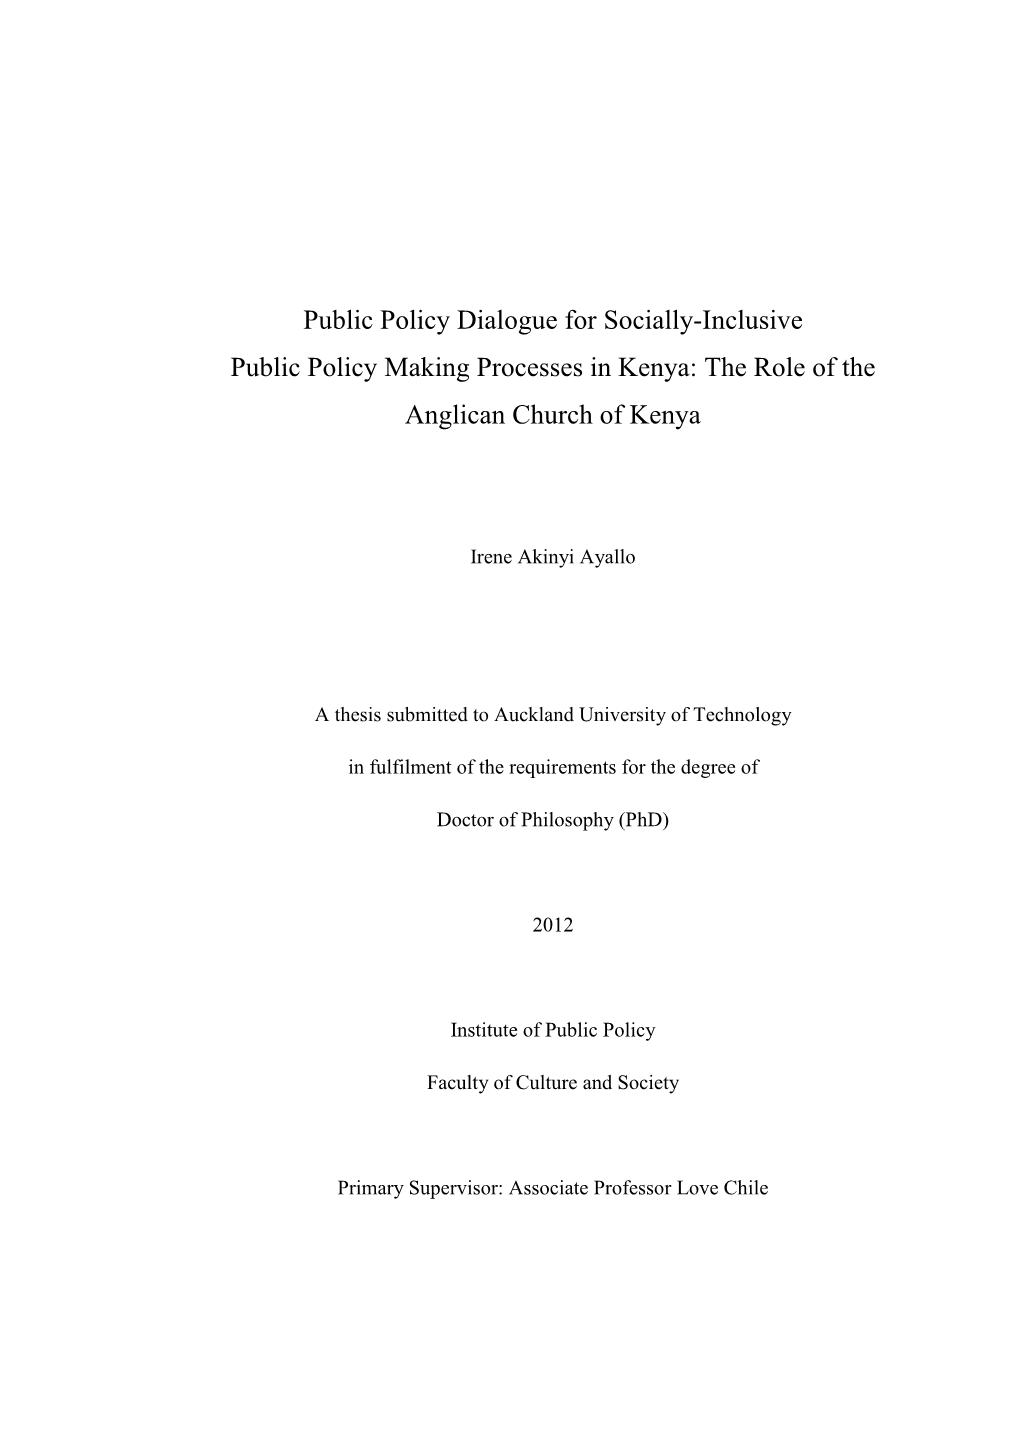 Public Policy Dialogue for Socially-Inclusive Public Policy Making Processes in Kenya: the Role of the Anglican Church of Kenya